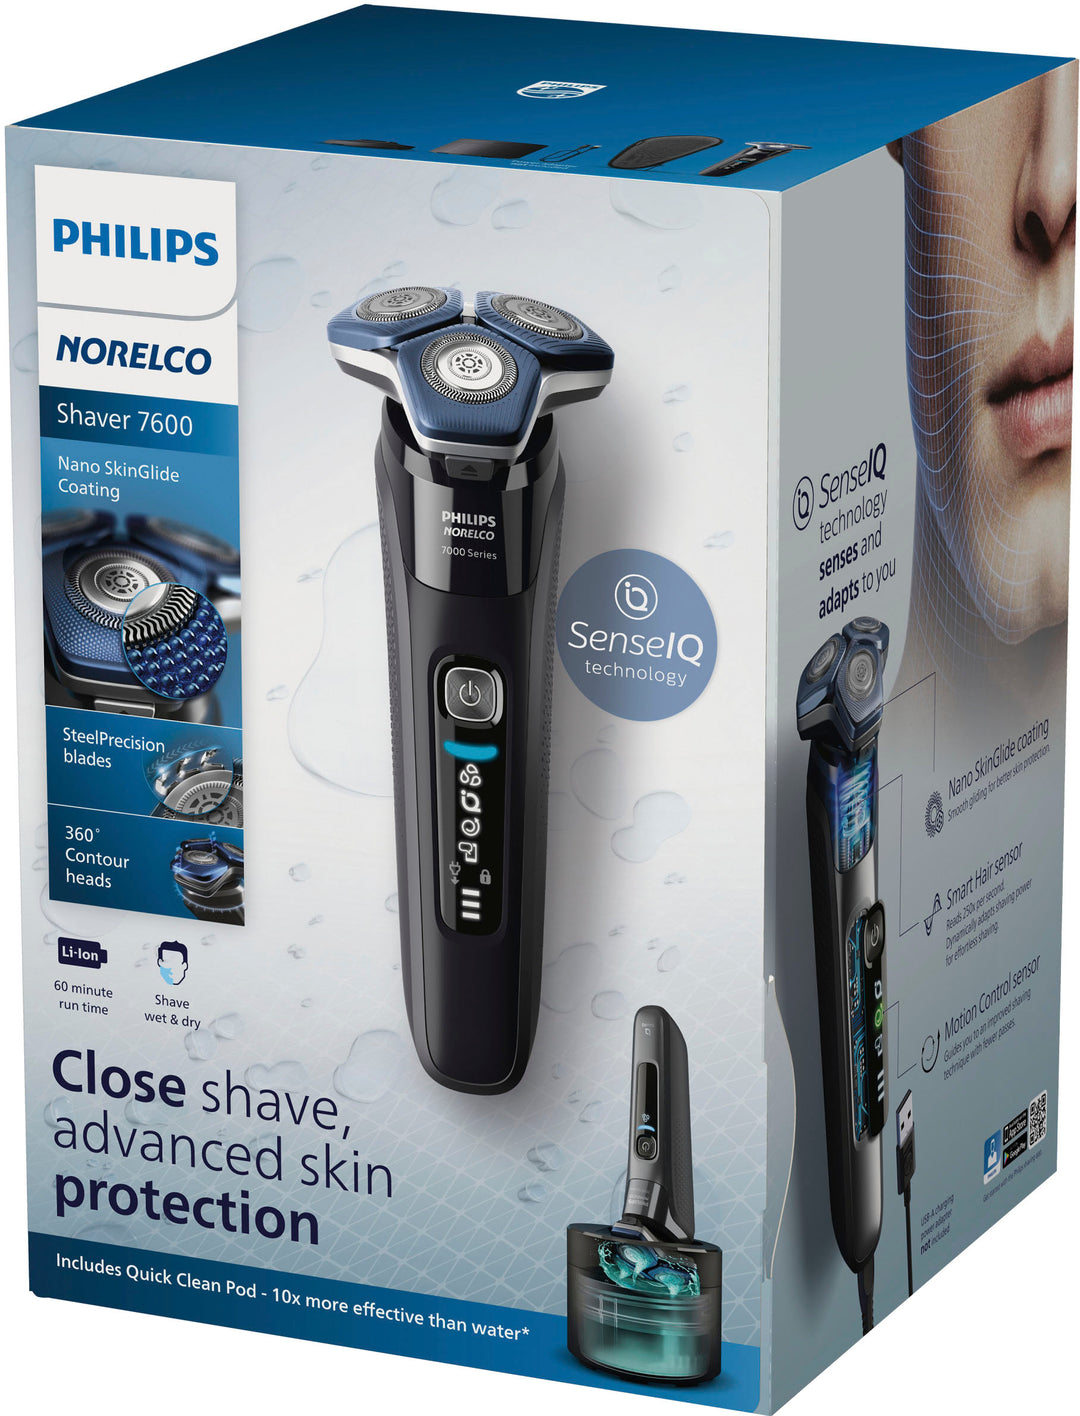 Philips Norelco Shaver 7600, Rechargeable Wet & Dry Electric Shaver with SenseIQ Technology, S7886/84 - Black_2